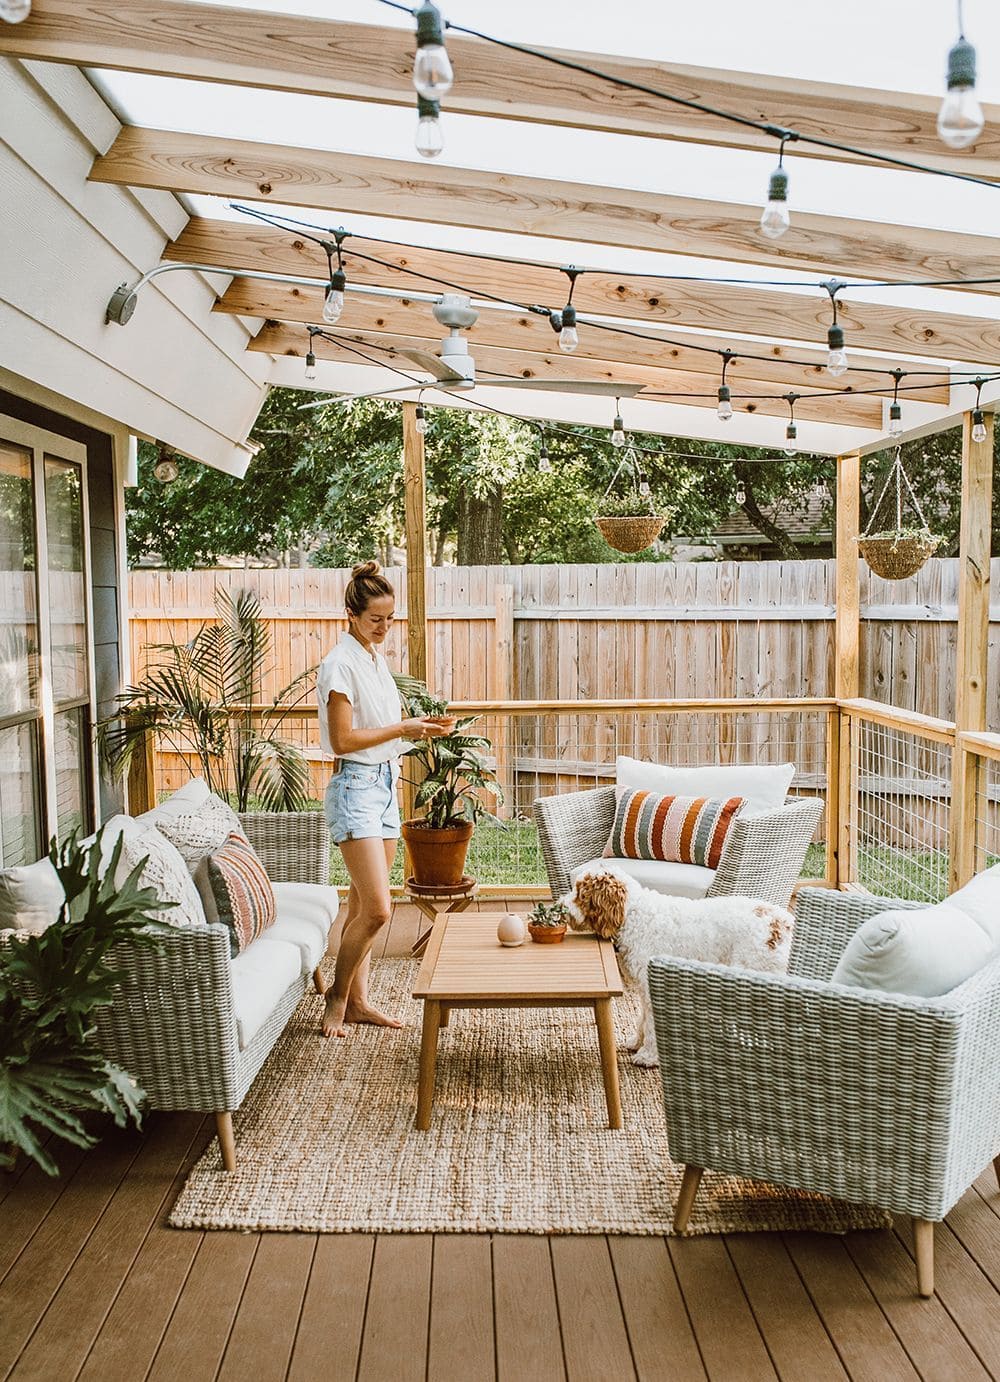 25 fabulous ideas to turn patios into inviting outdoor spaces - 91